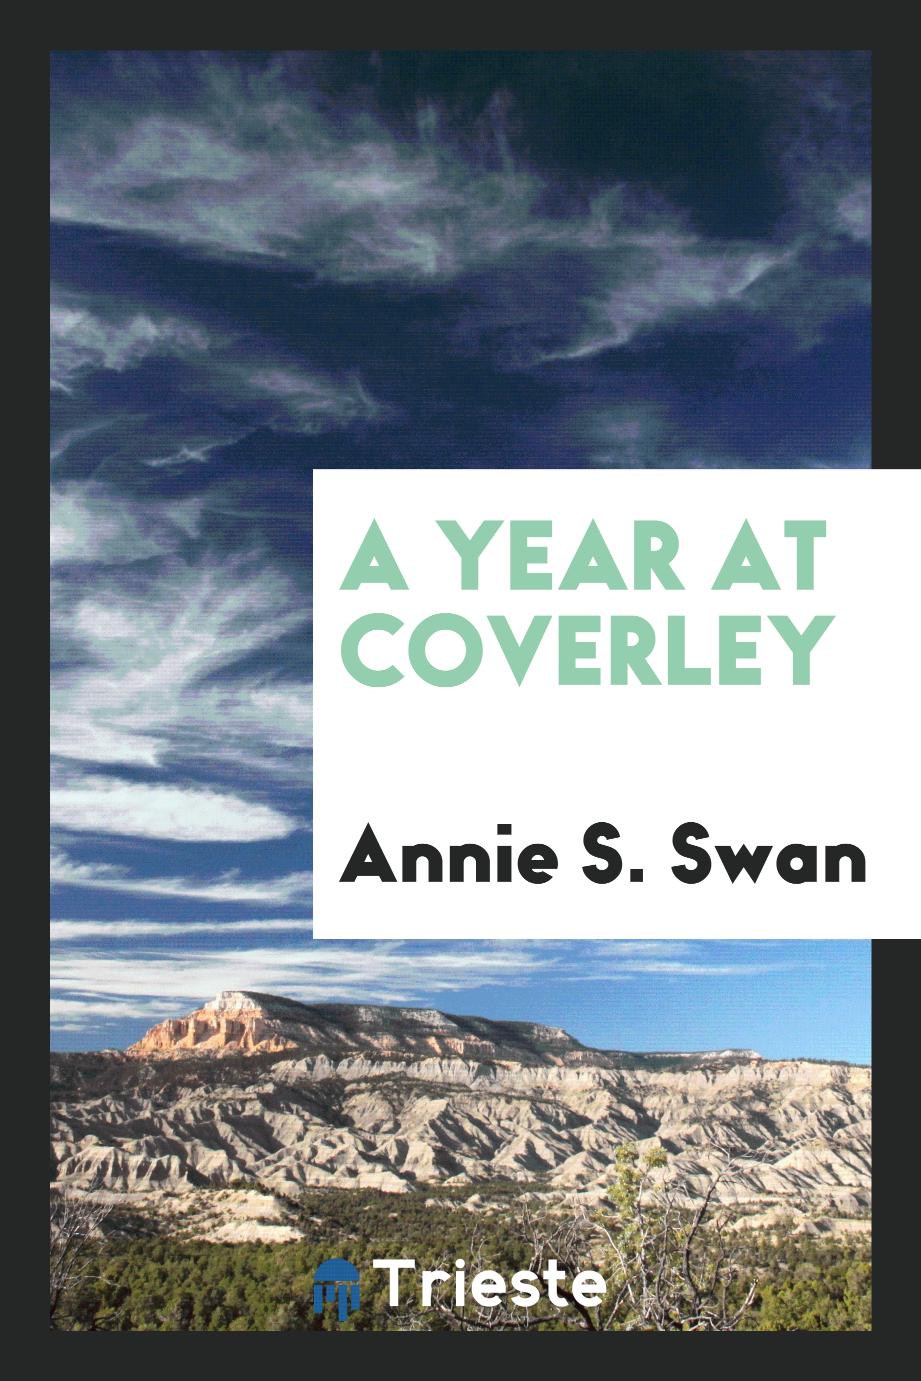 A year at Coverley